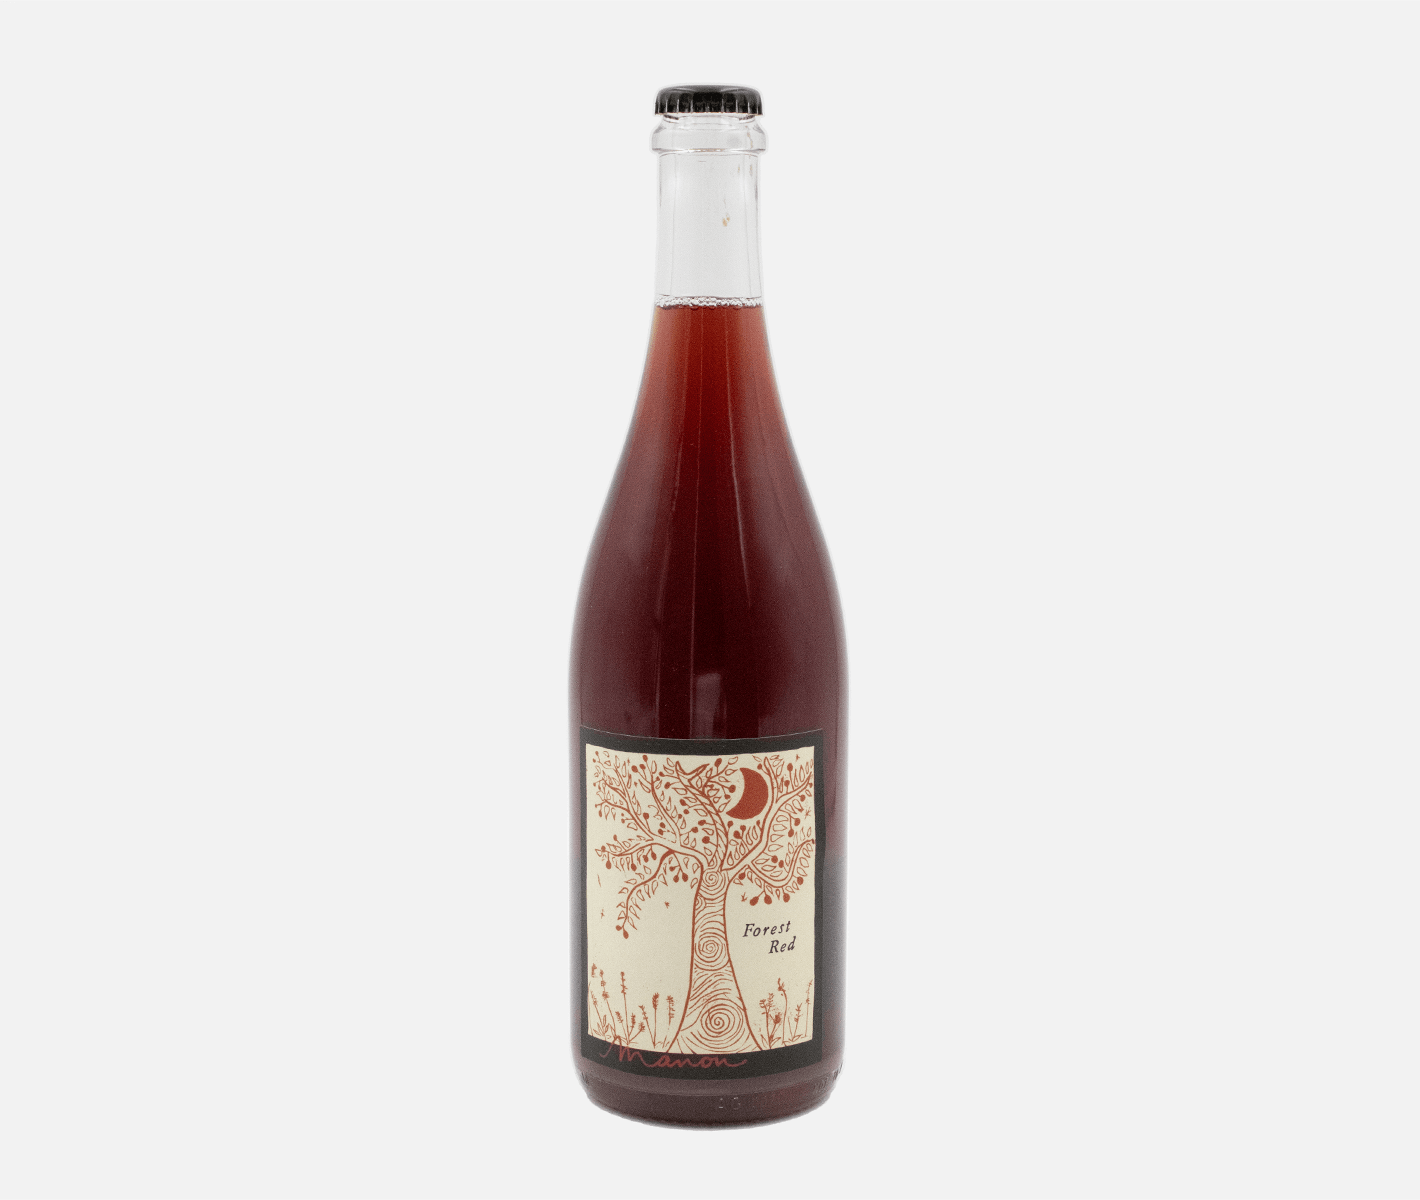 2019 Manon Forest Red - DRNKS